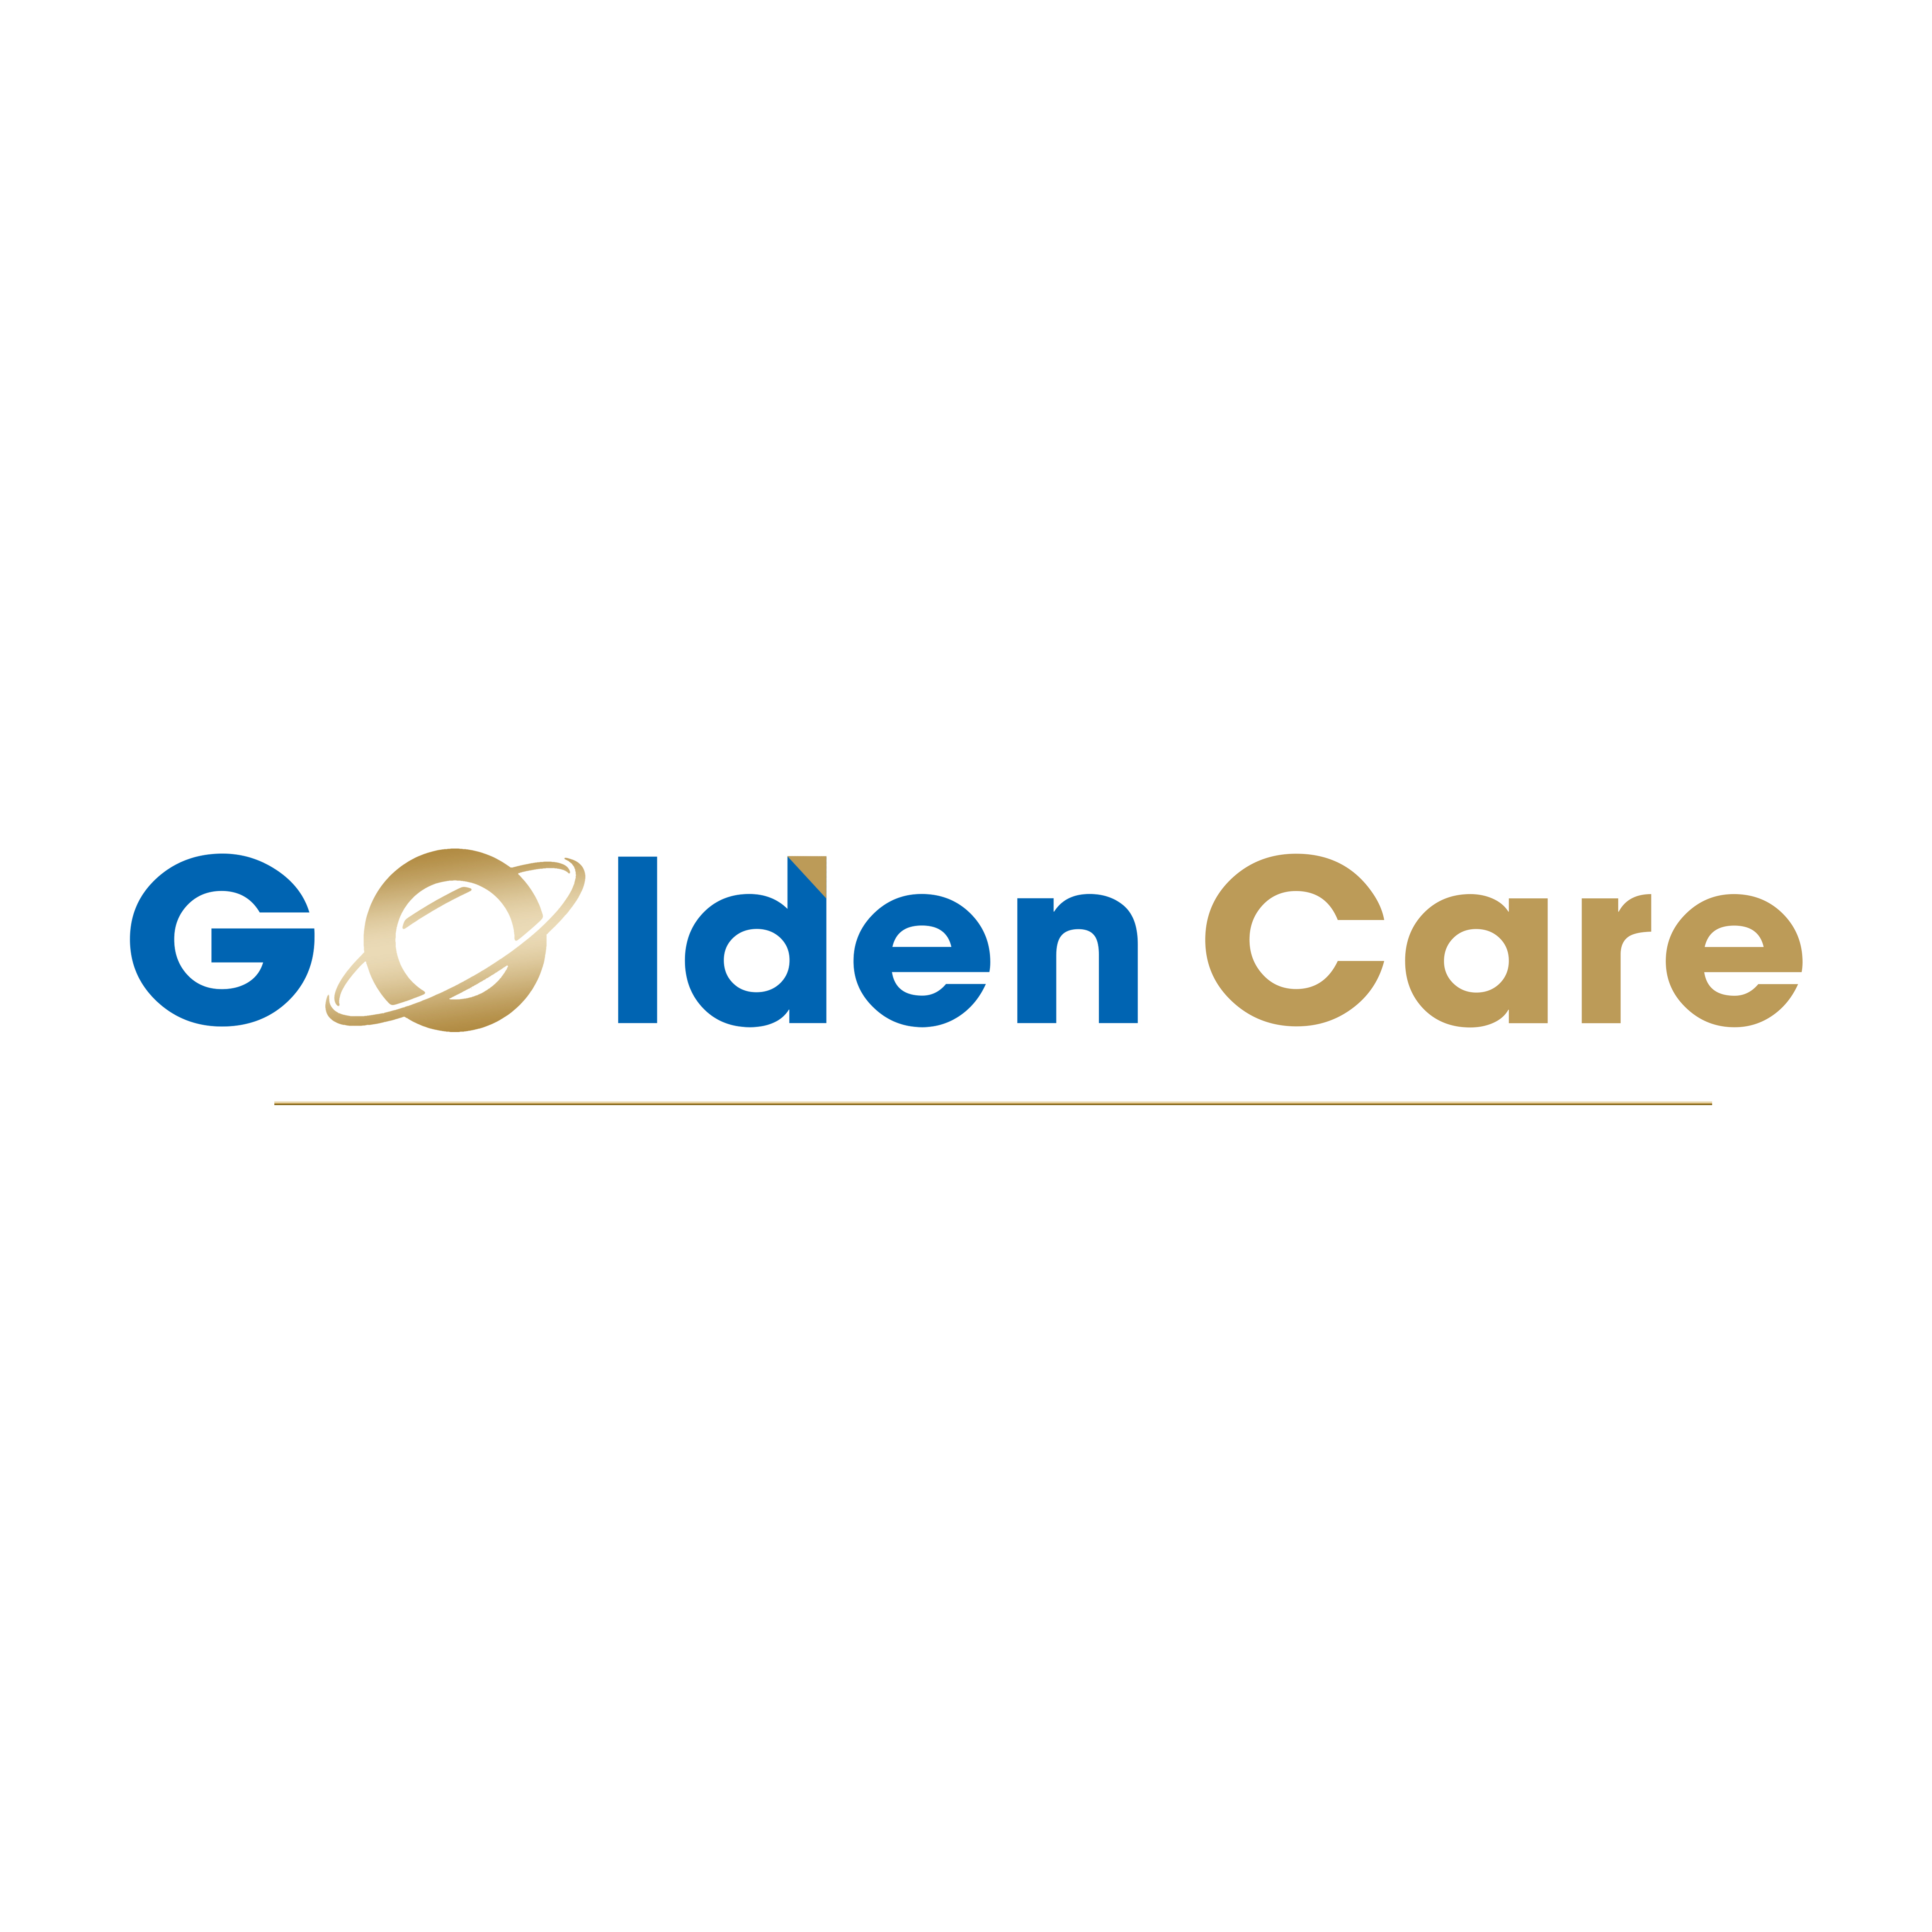 Golden Care Store